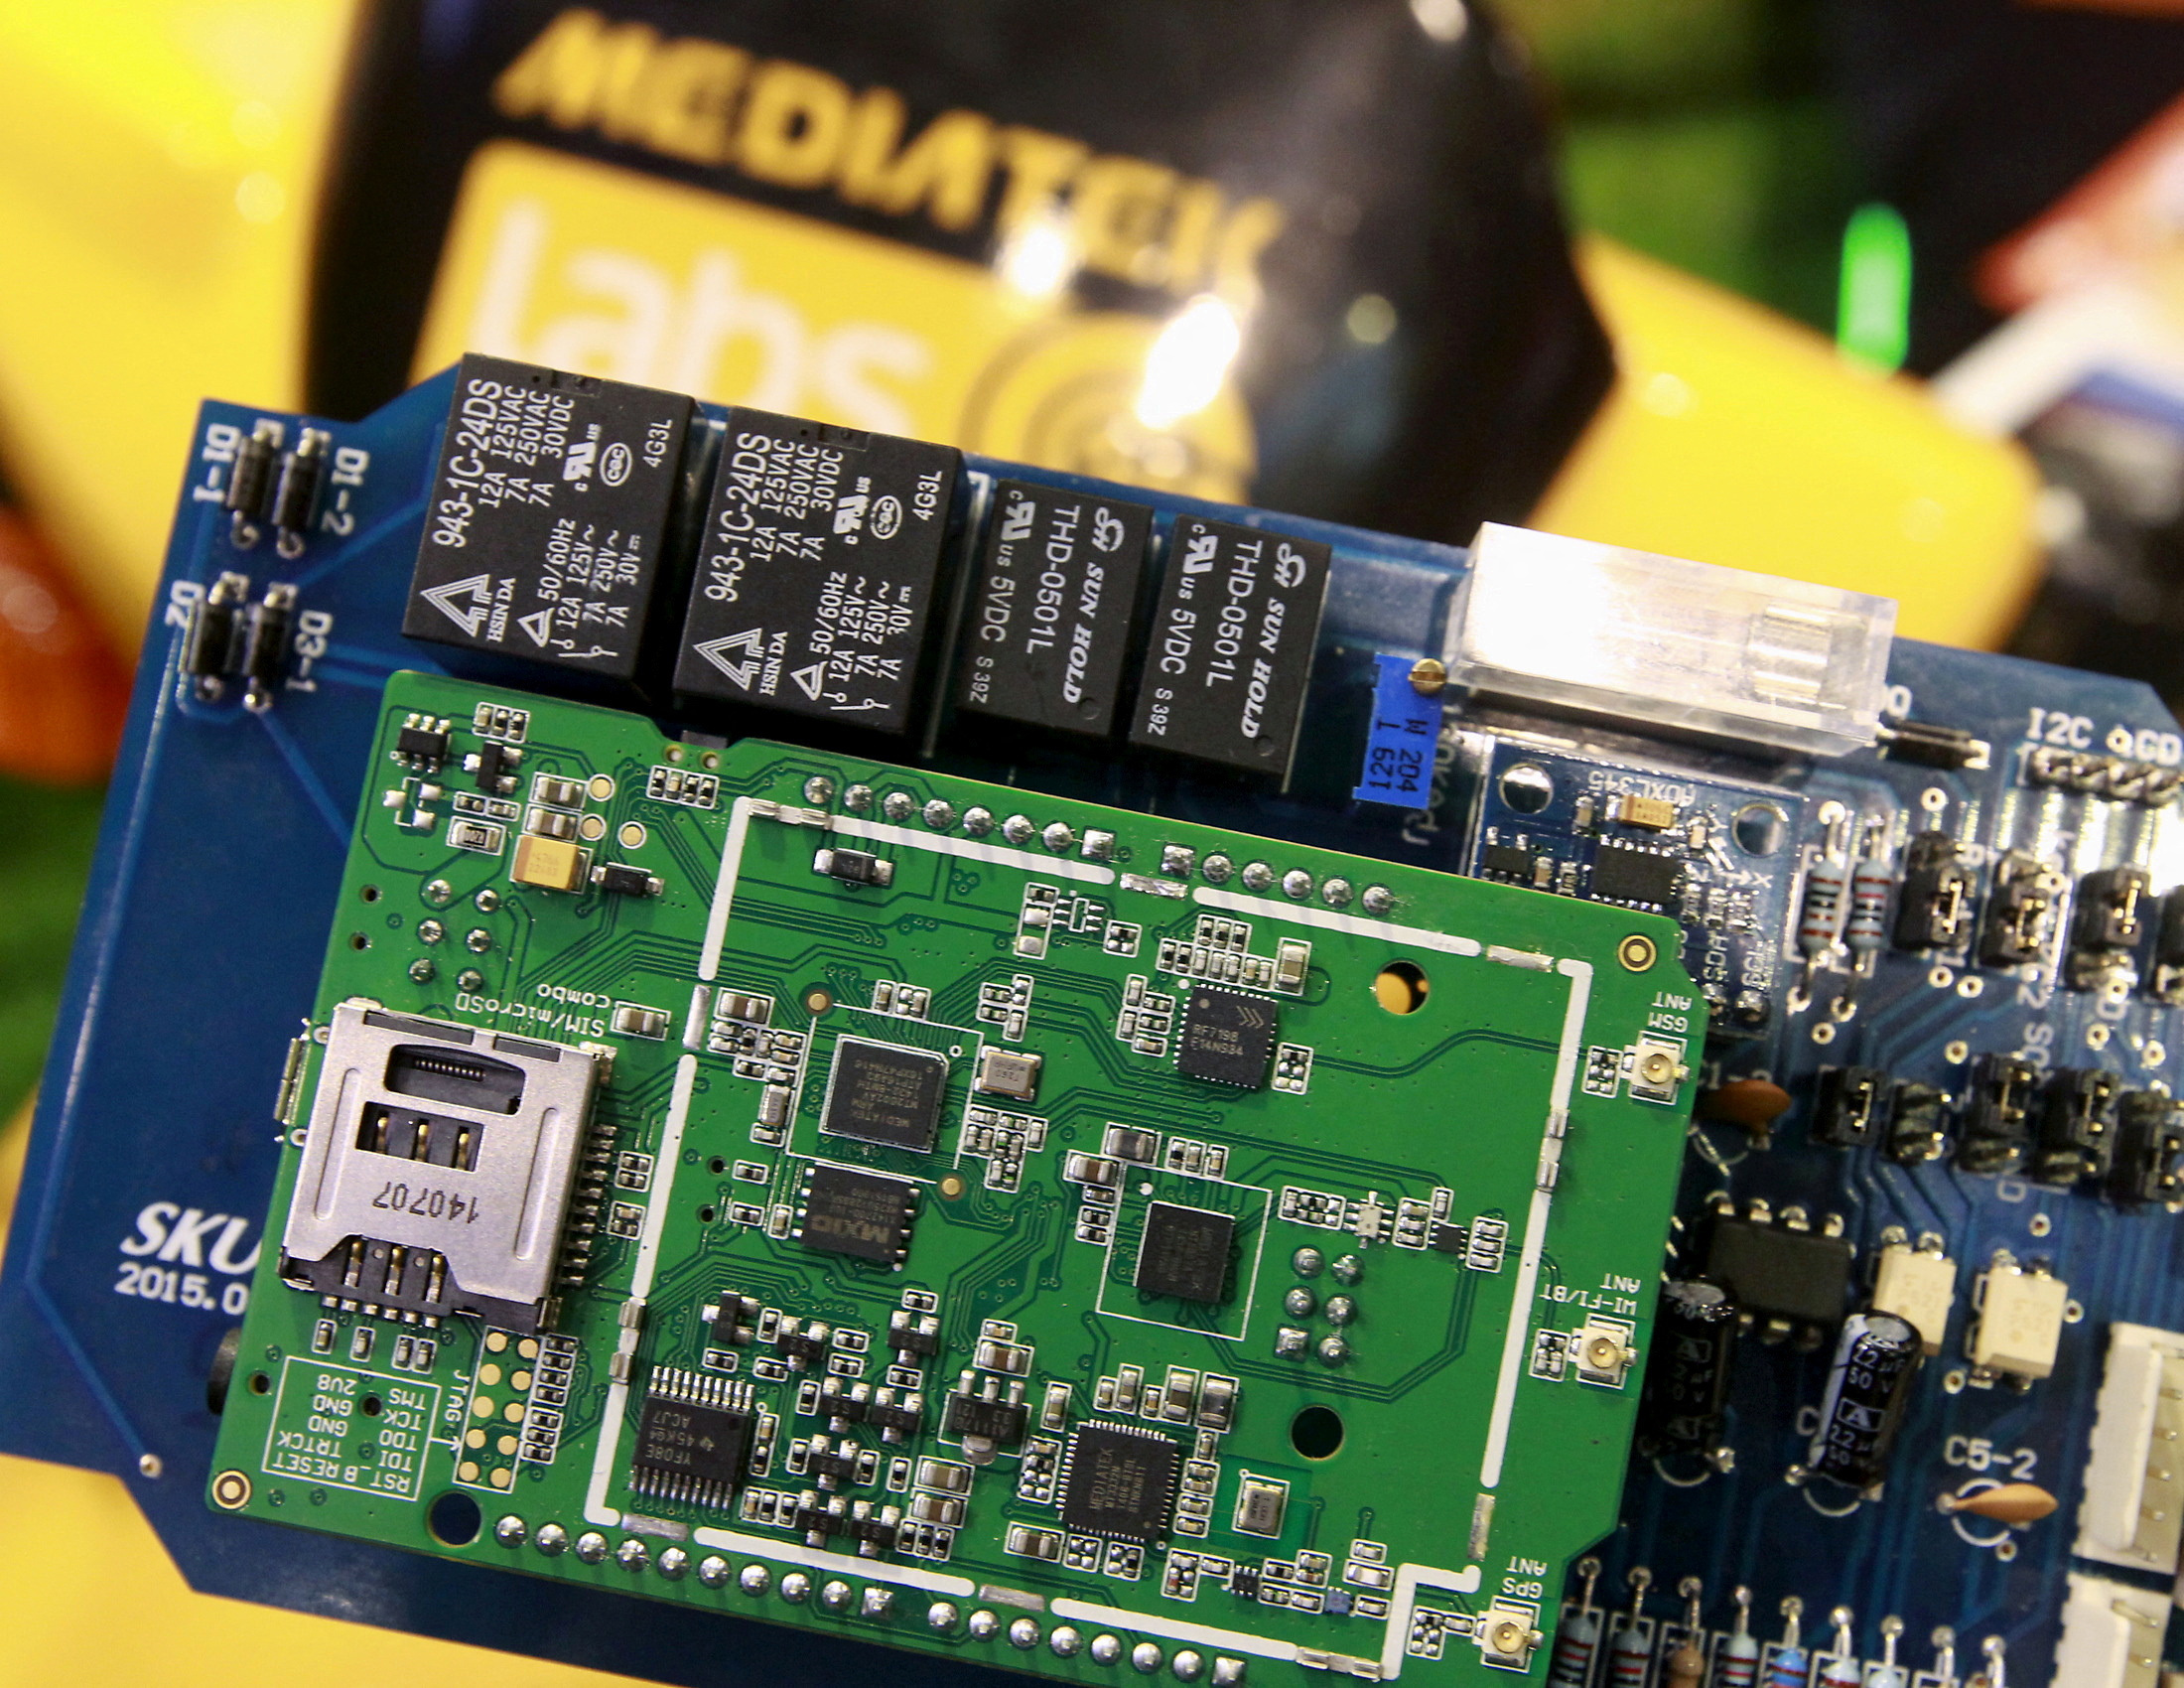 MediaTek chips are seen on a development board at the MediaTek booth during the 2015 Computex exhibition in Taipei, Taiwan